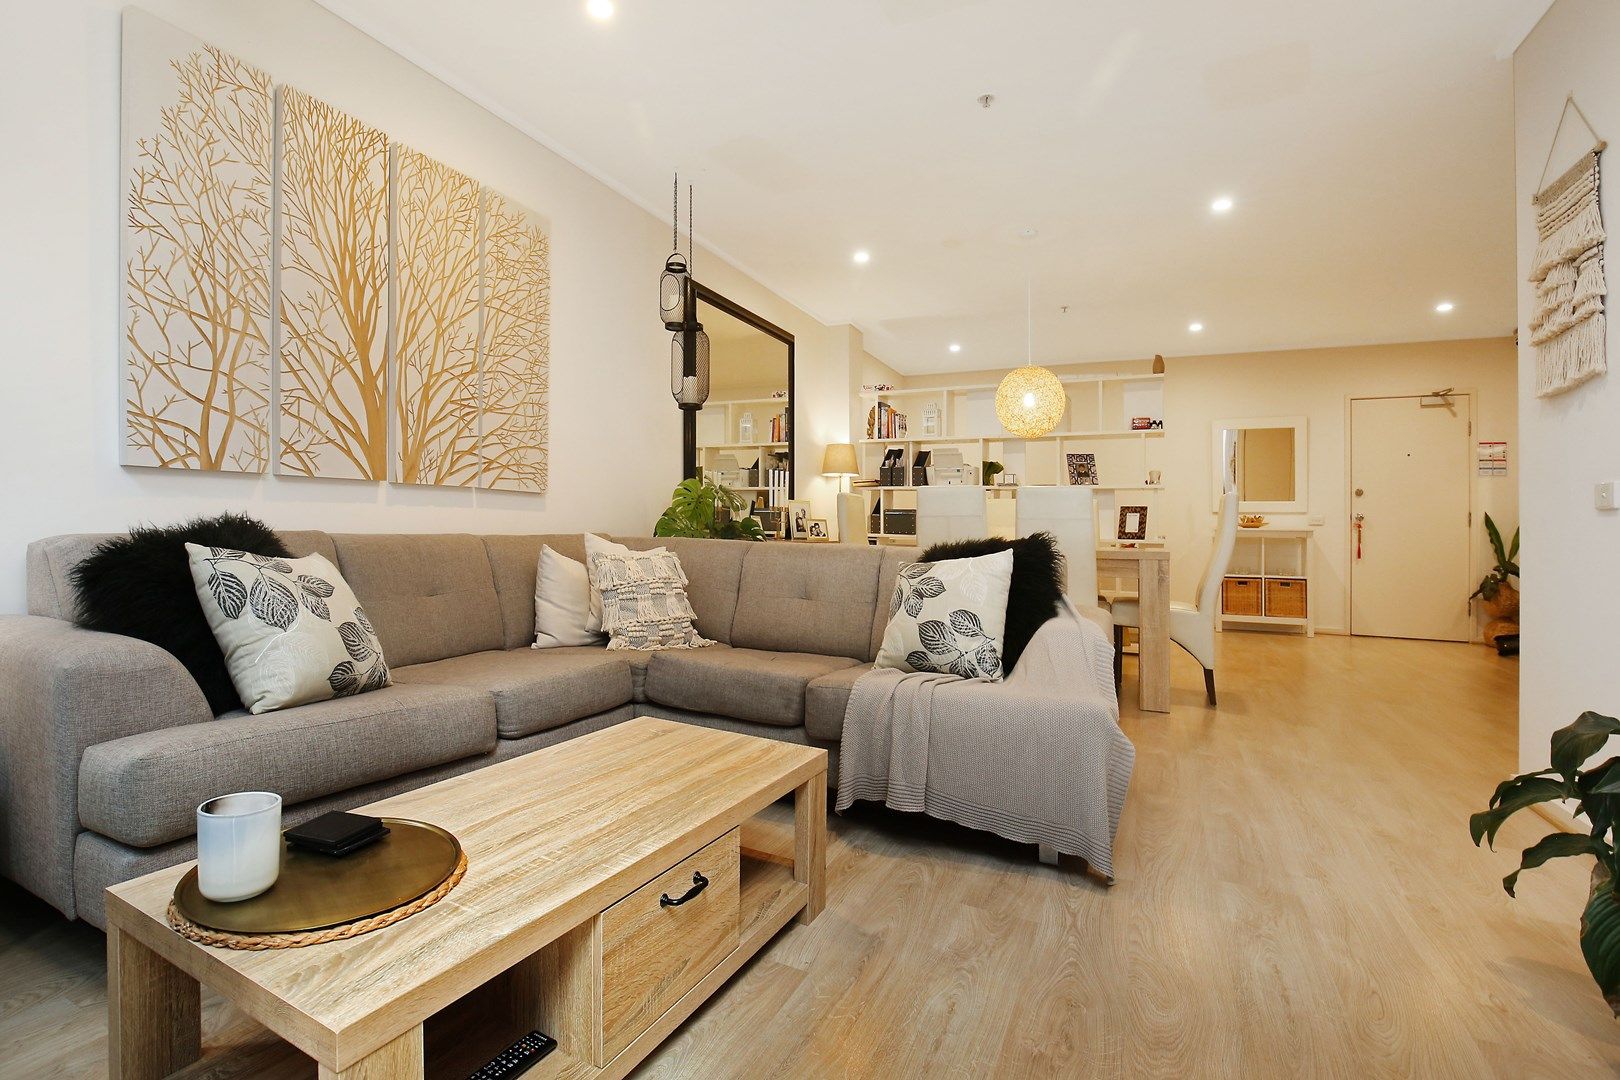 2 bedrooms House in 48/183 City Road SOUTHBANK VIC, 3006